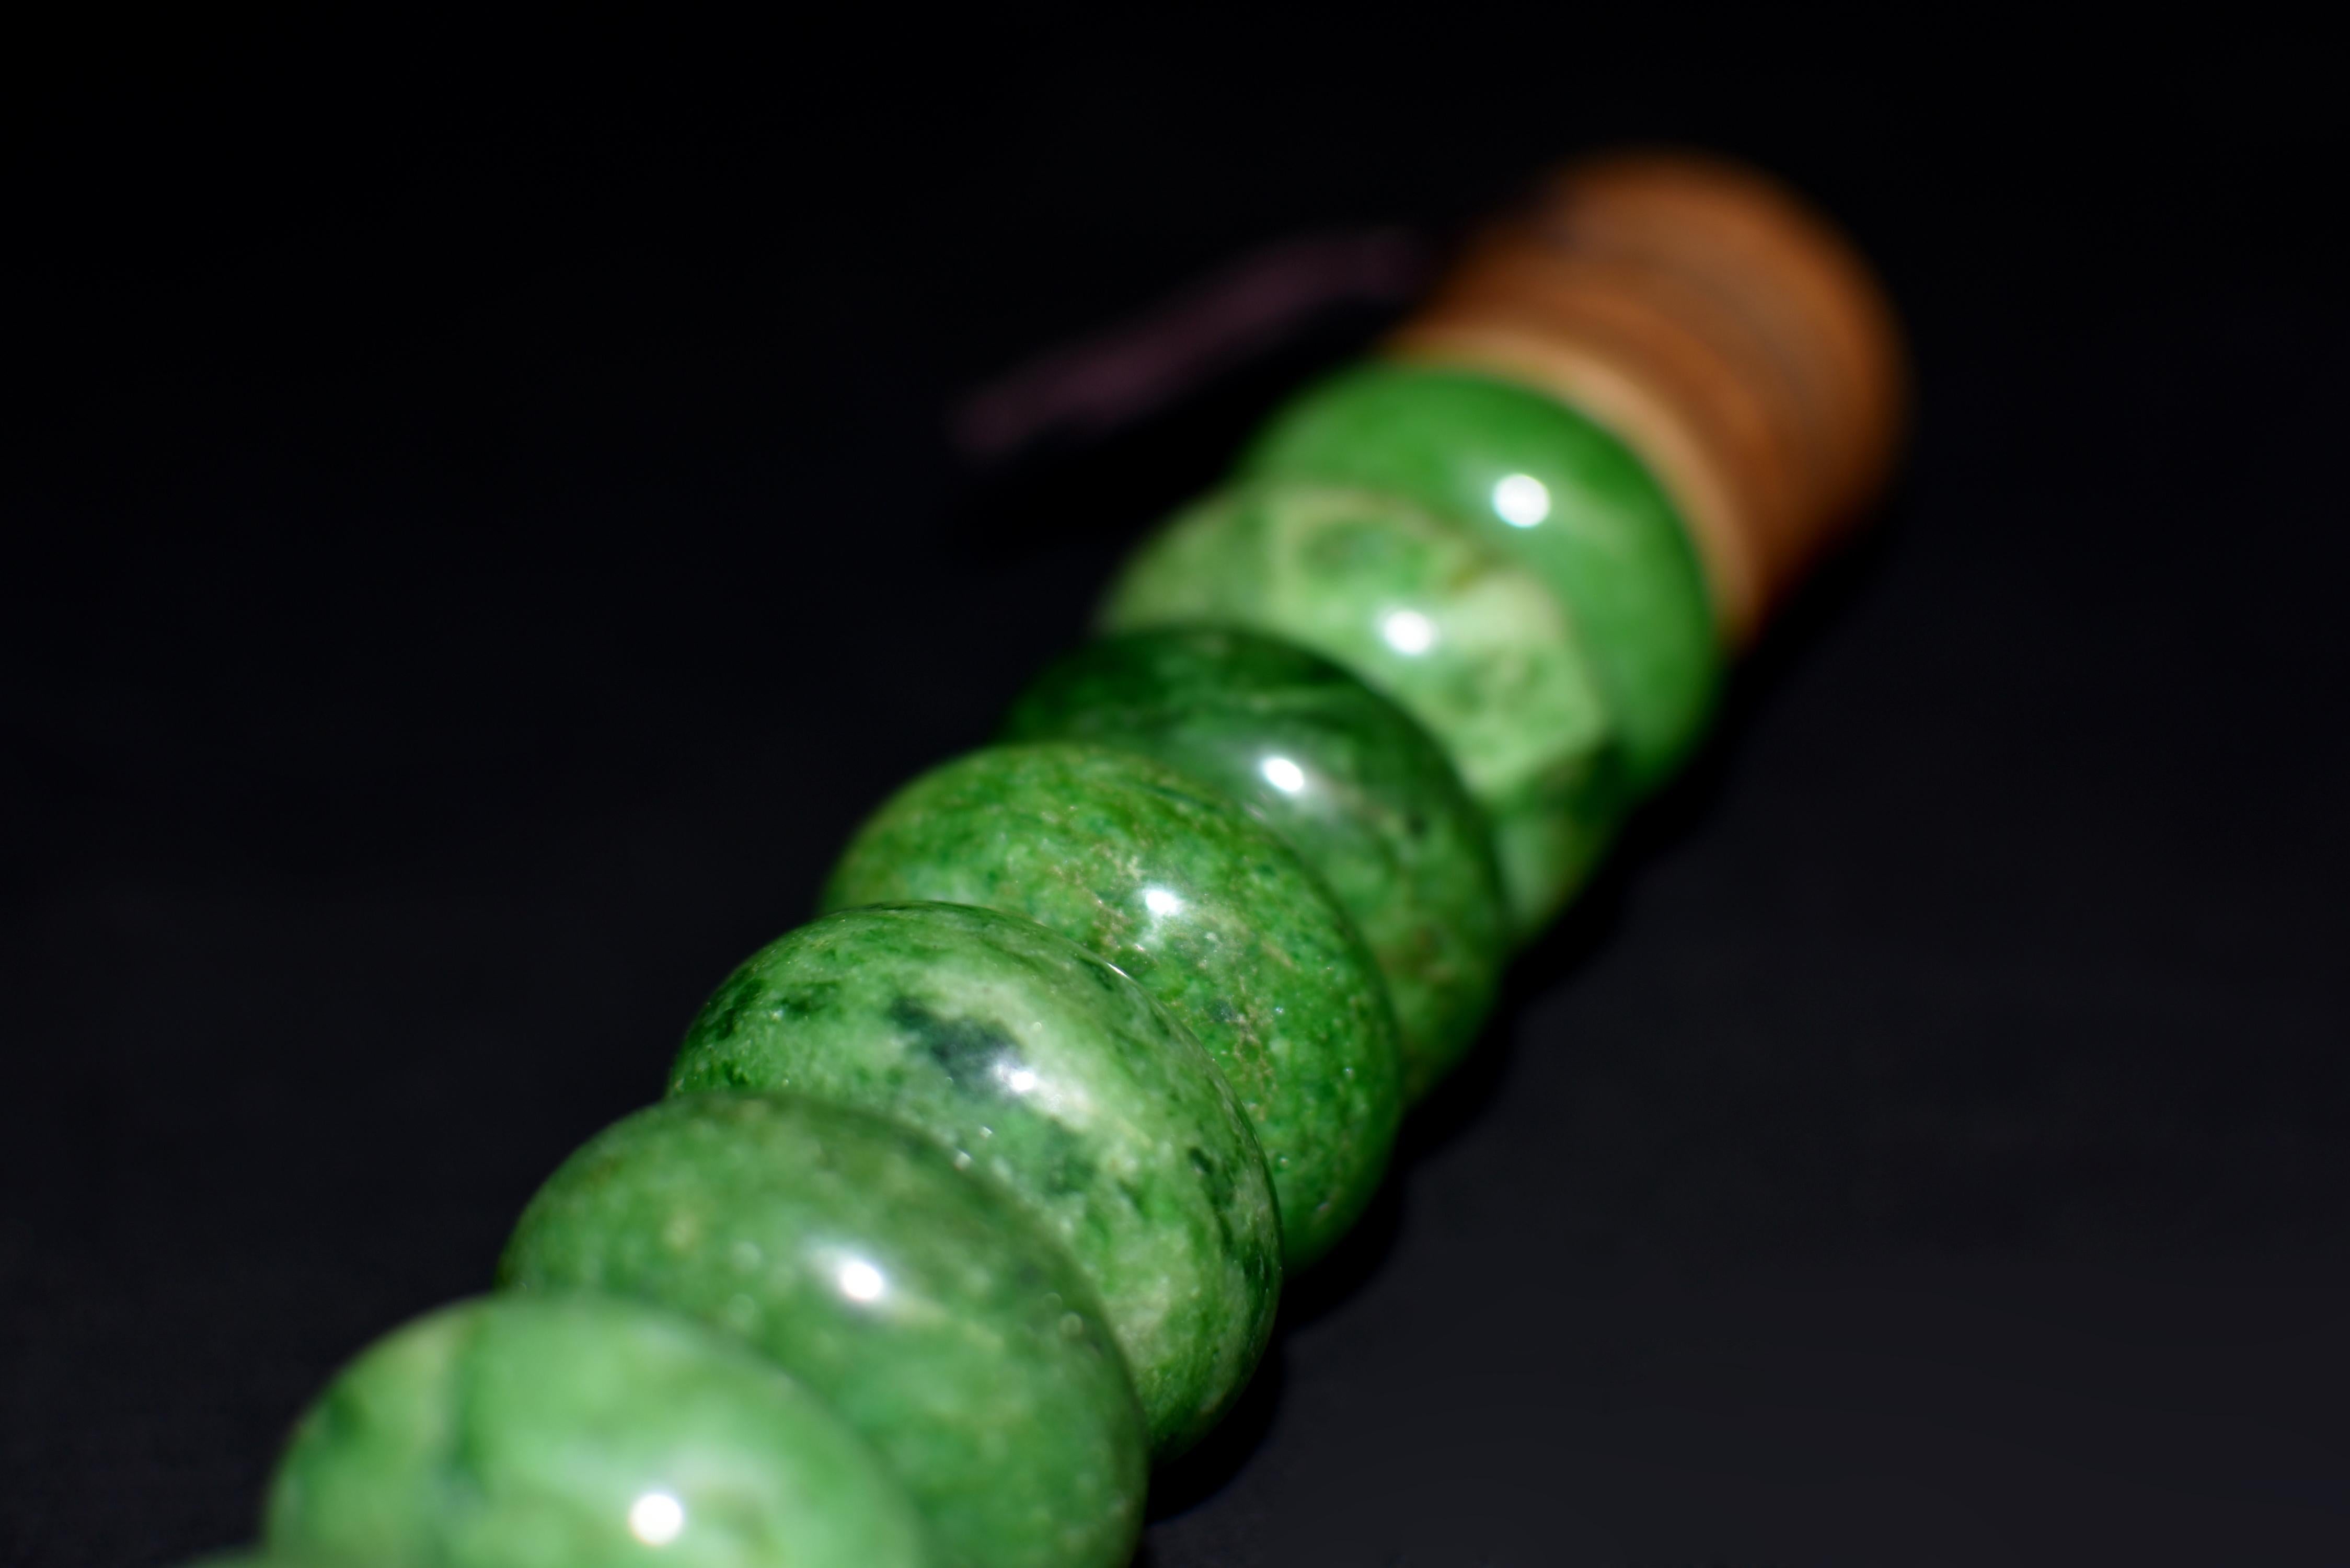 Calligraphy Brush Large Green Marble Beads 15